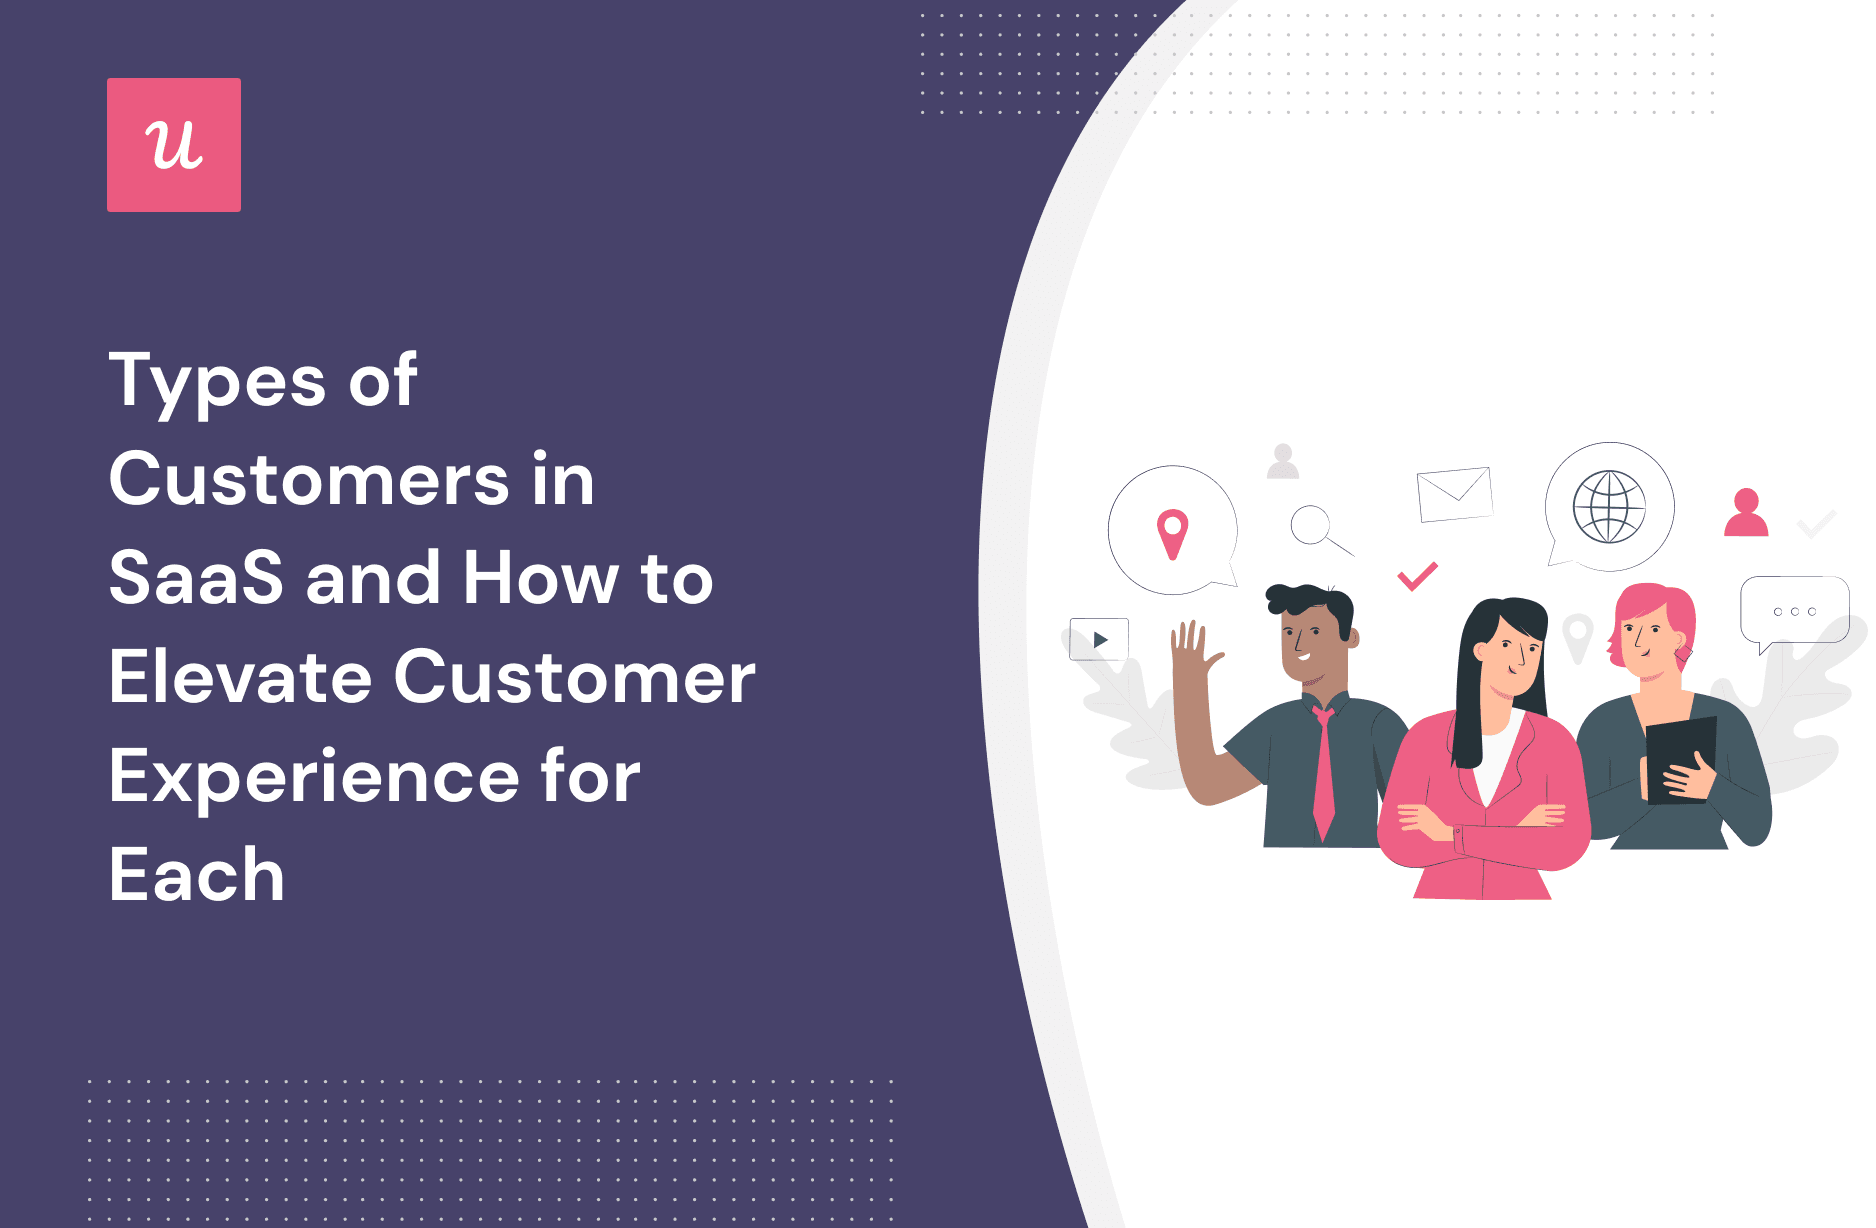 Types of Customers in SaaS and How to Elevate Customer Experience for Each cover